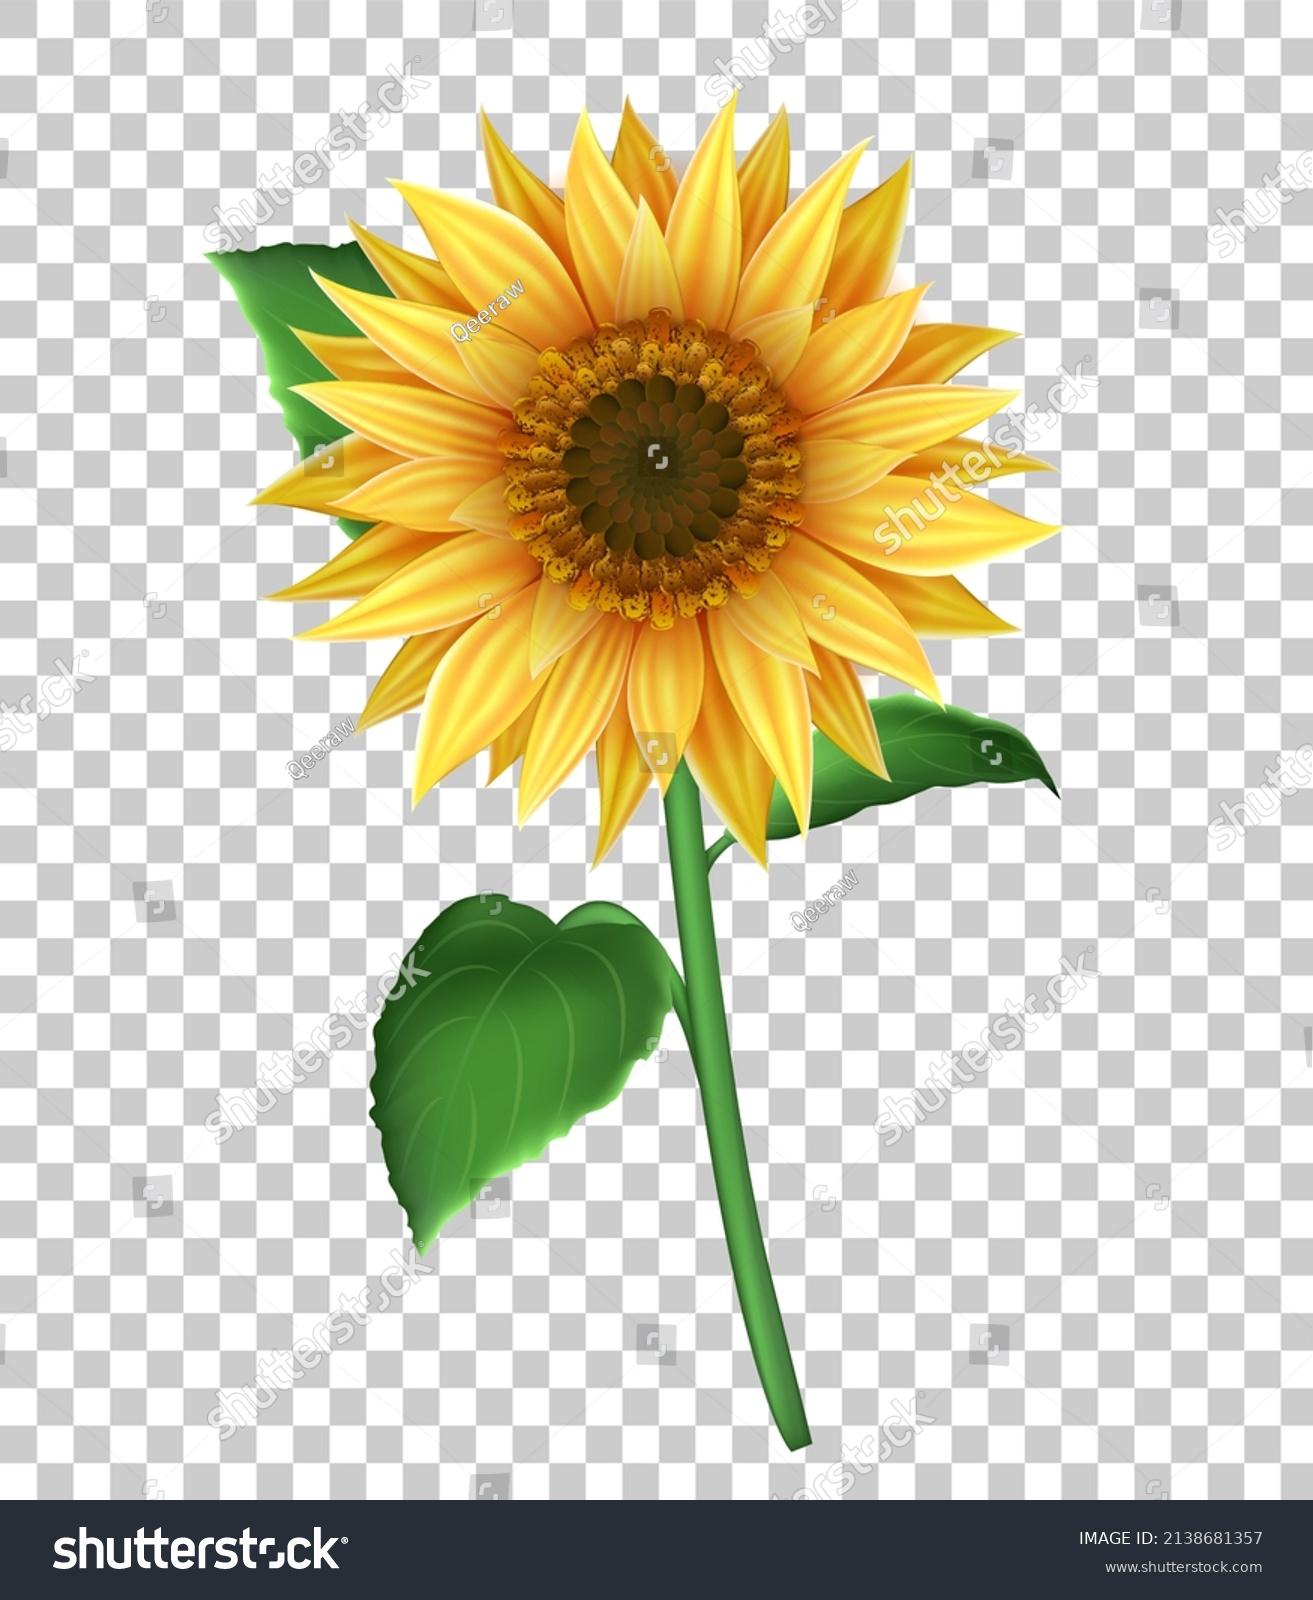 SVG of Illustration with 3d sunflower  isolated on transparent background. Realistic vector illustration with yellow flower for decoration. svg